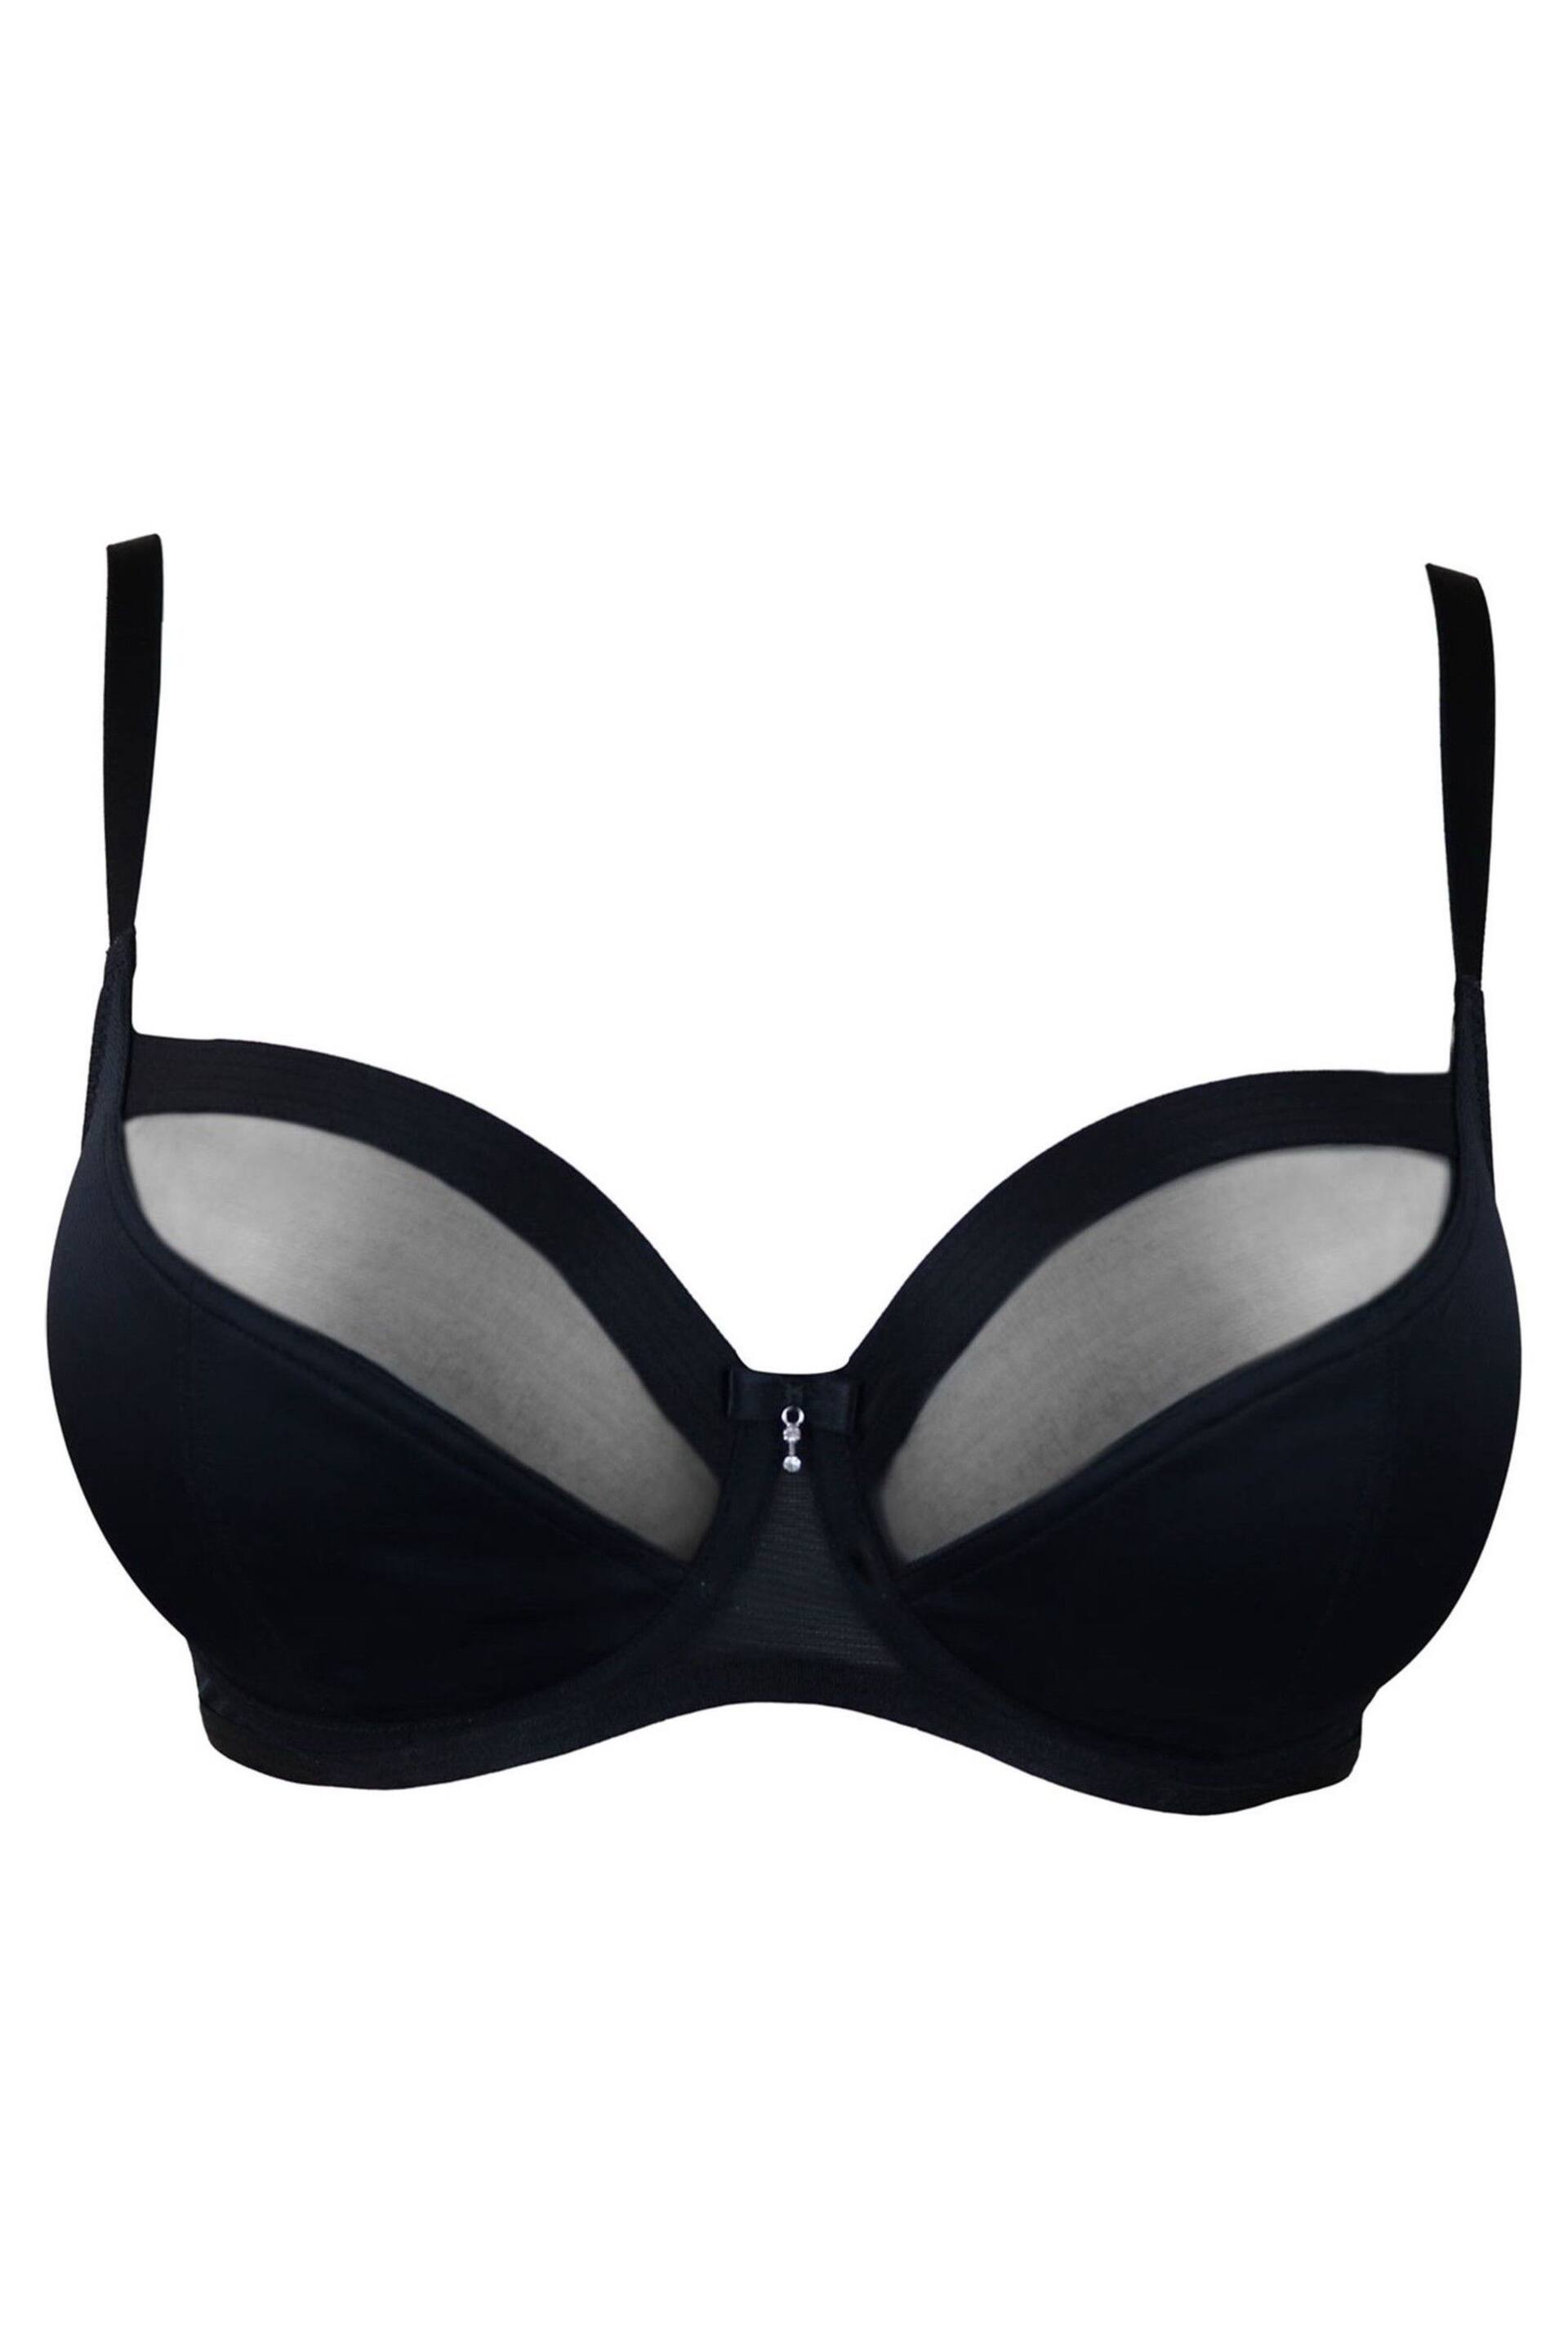 Pour Moi Black Non Padded Viva Luxe Underwired Bra - Image 5 of 6